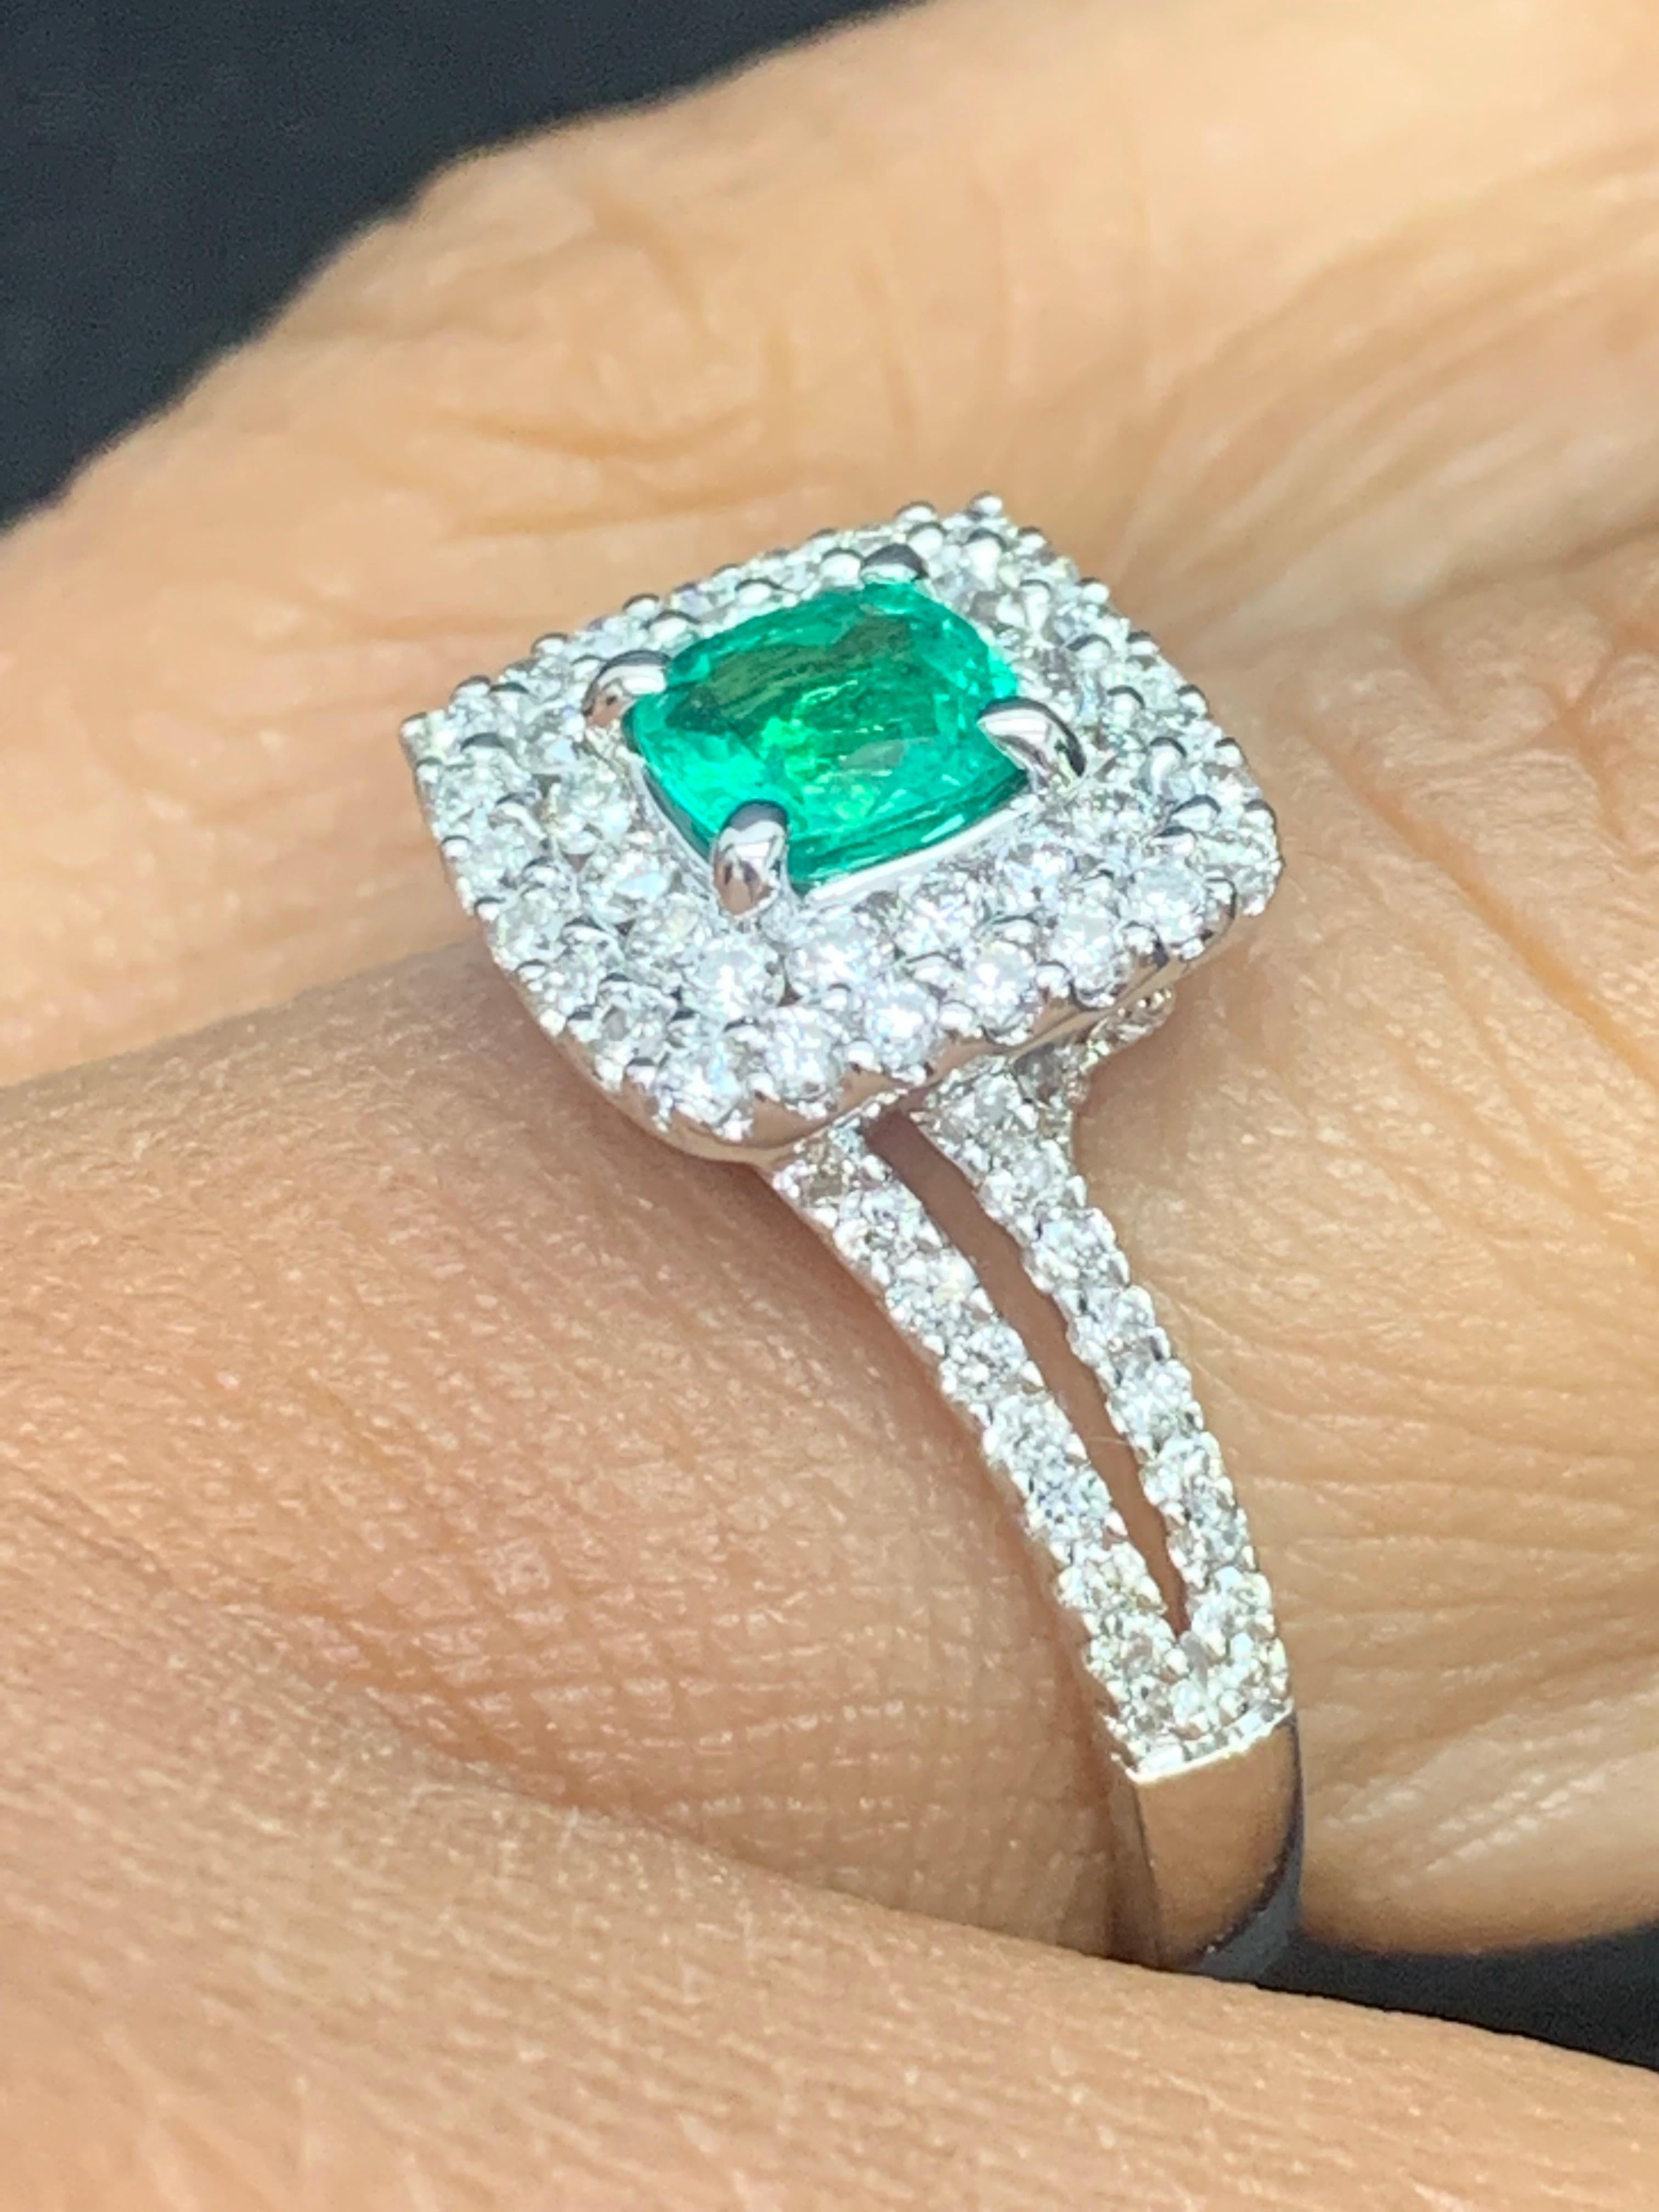 0.48 Carat Cushion Cut Emerald and Diamond Fashion Ring in 18K White Gold For Sale 6